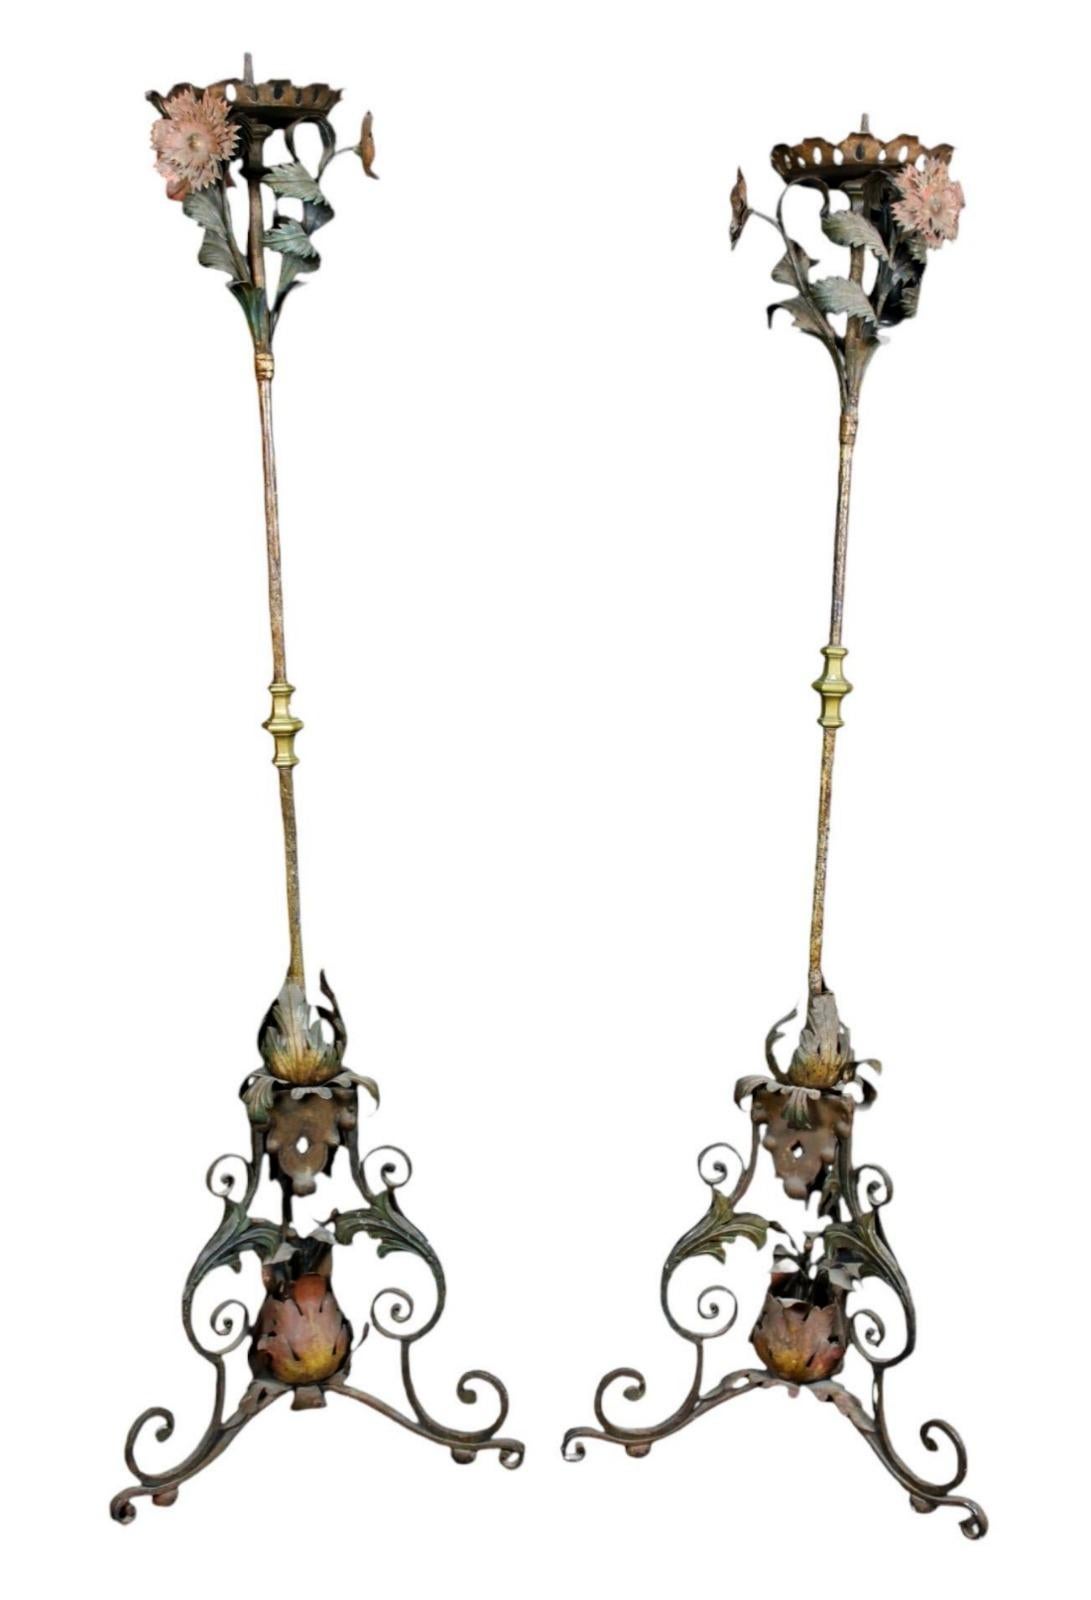 Baroque PAIR OF IMPORTANT 17th Century VENETIAN TORCHERS For Sale